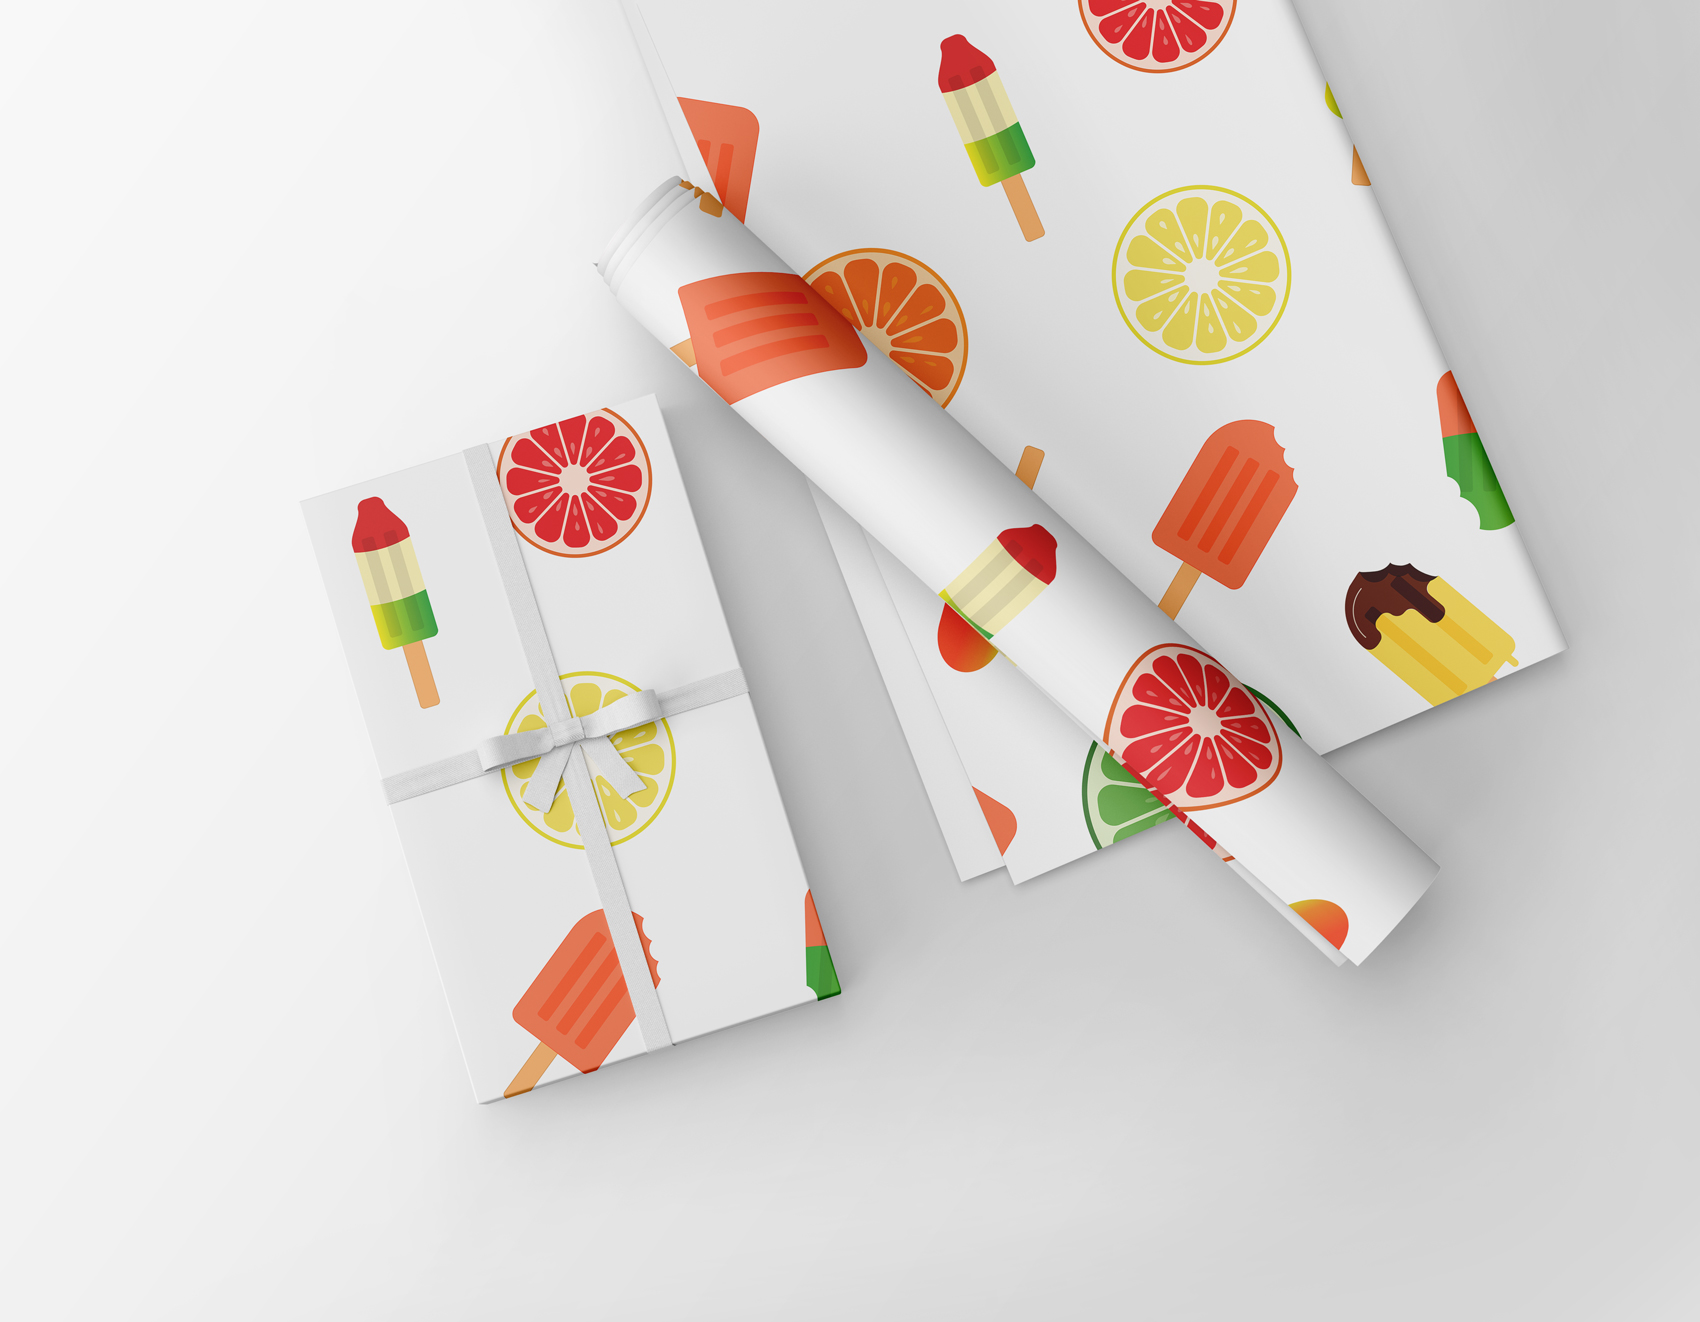 popsicle design2 on wrapping paper 38